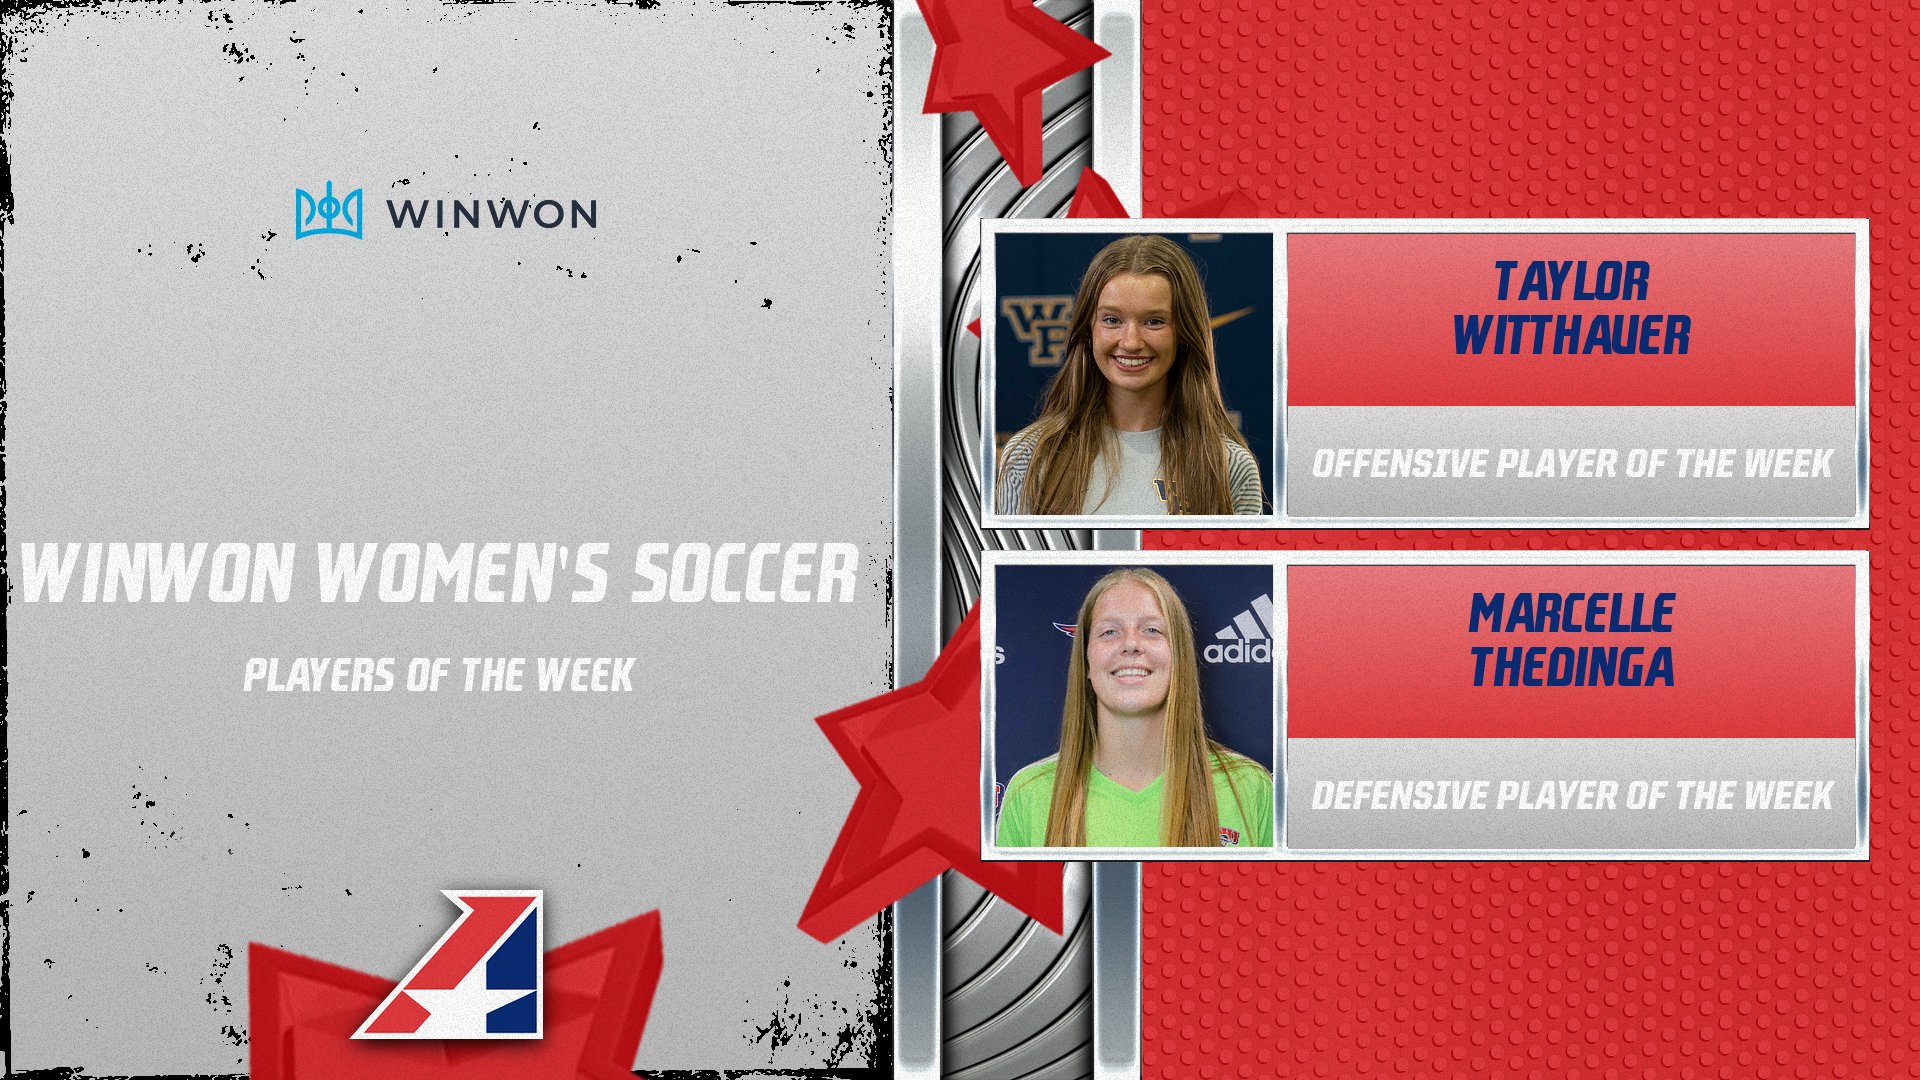 WinWon Women’s Soccer Conference Players of the Week Announced